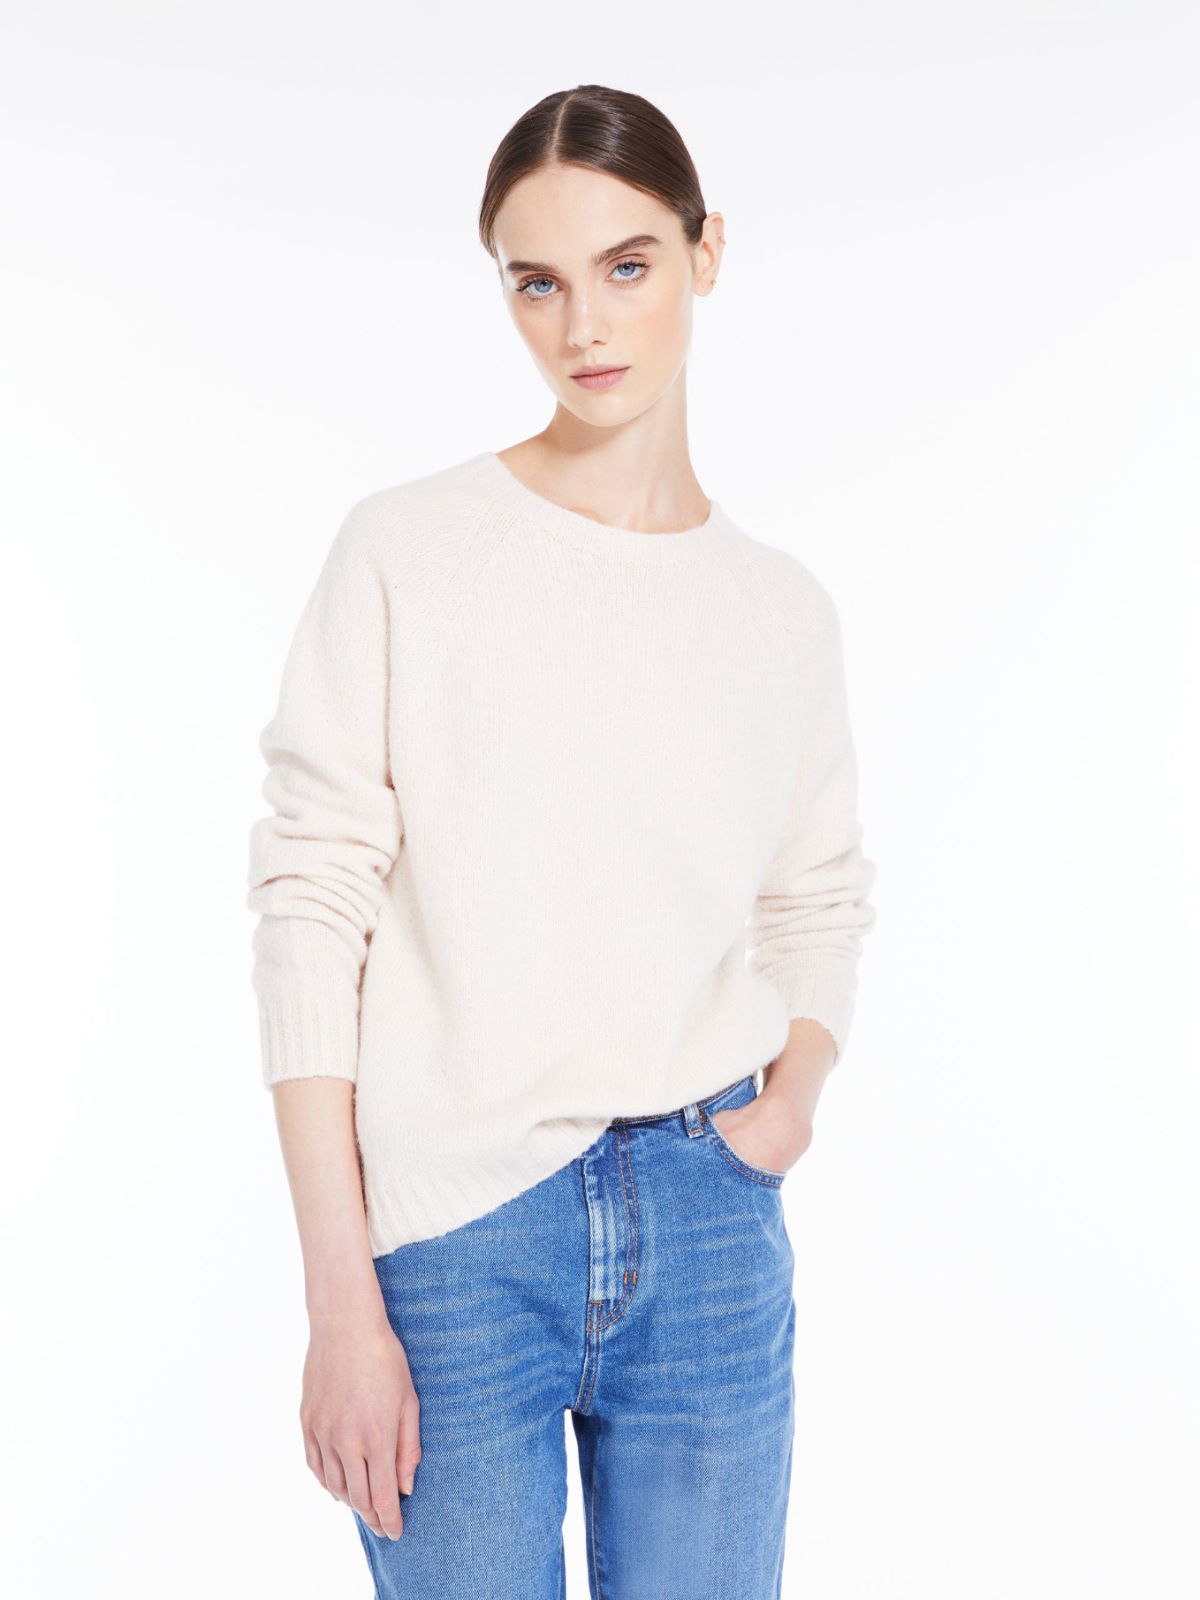 Soft knit top in alpaca and cotton - IVORY - Weekend Max Mara - 4